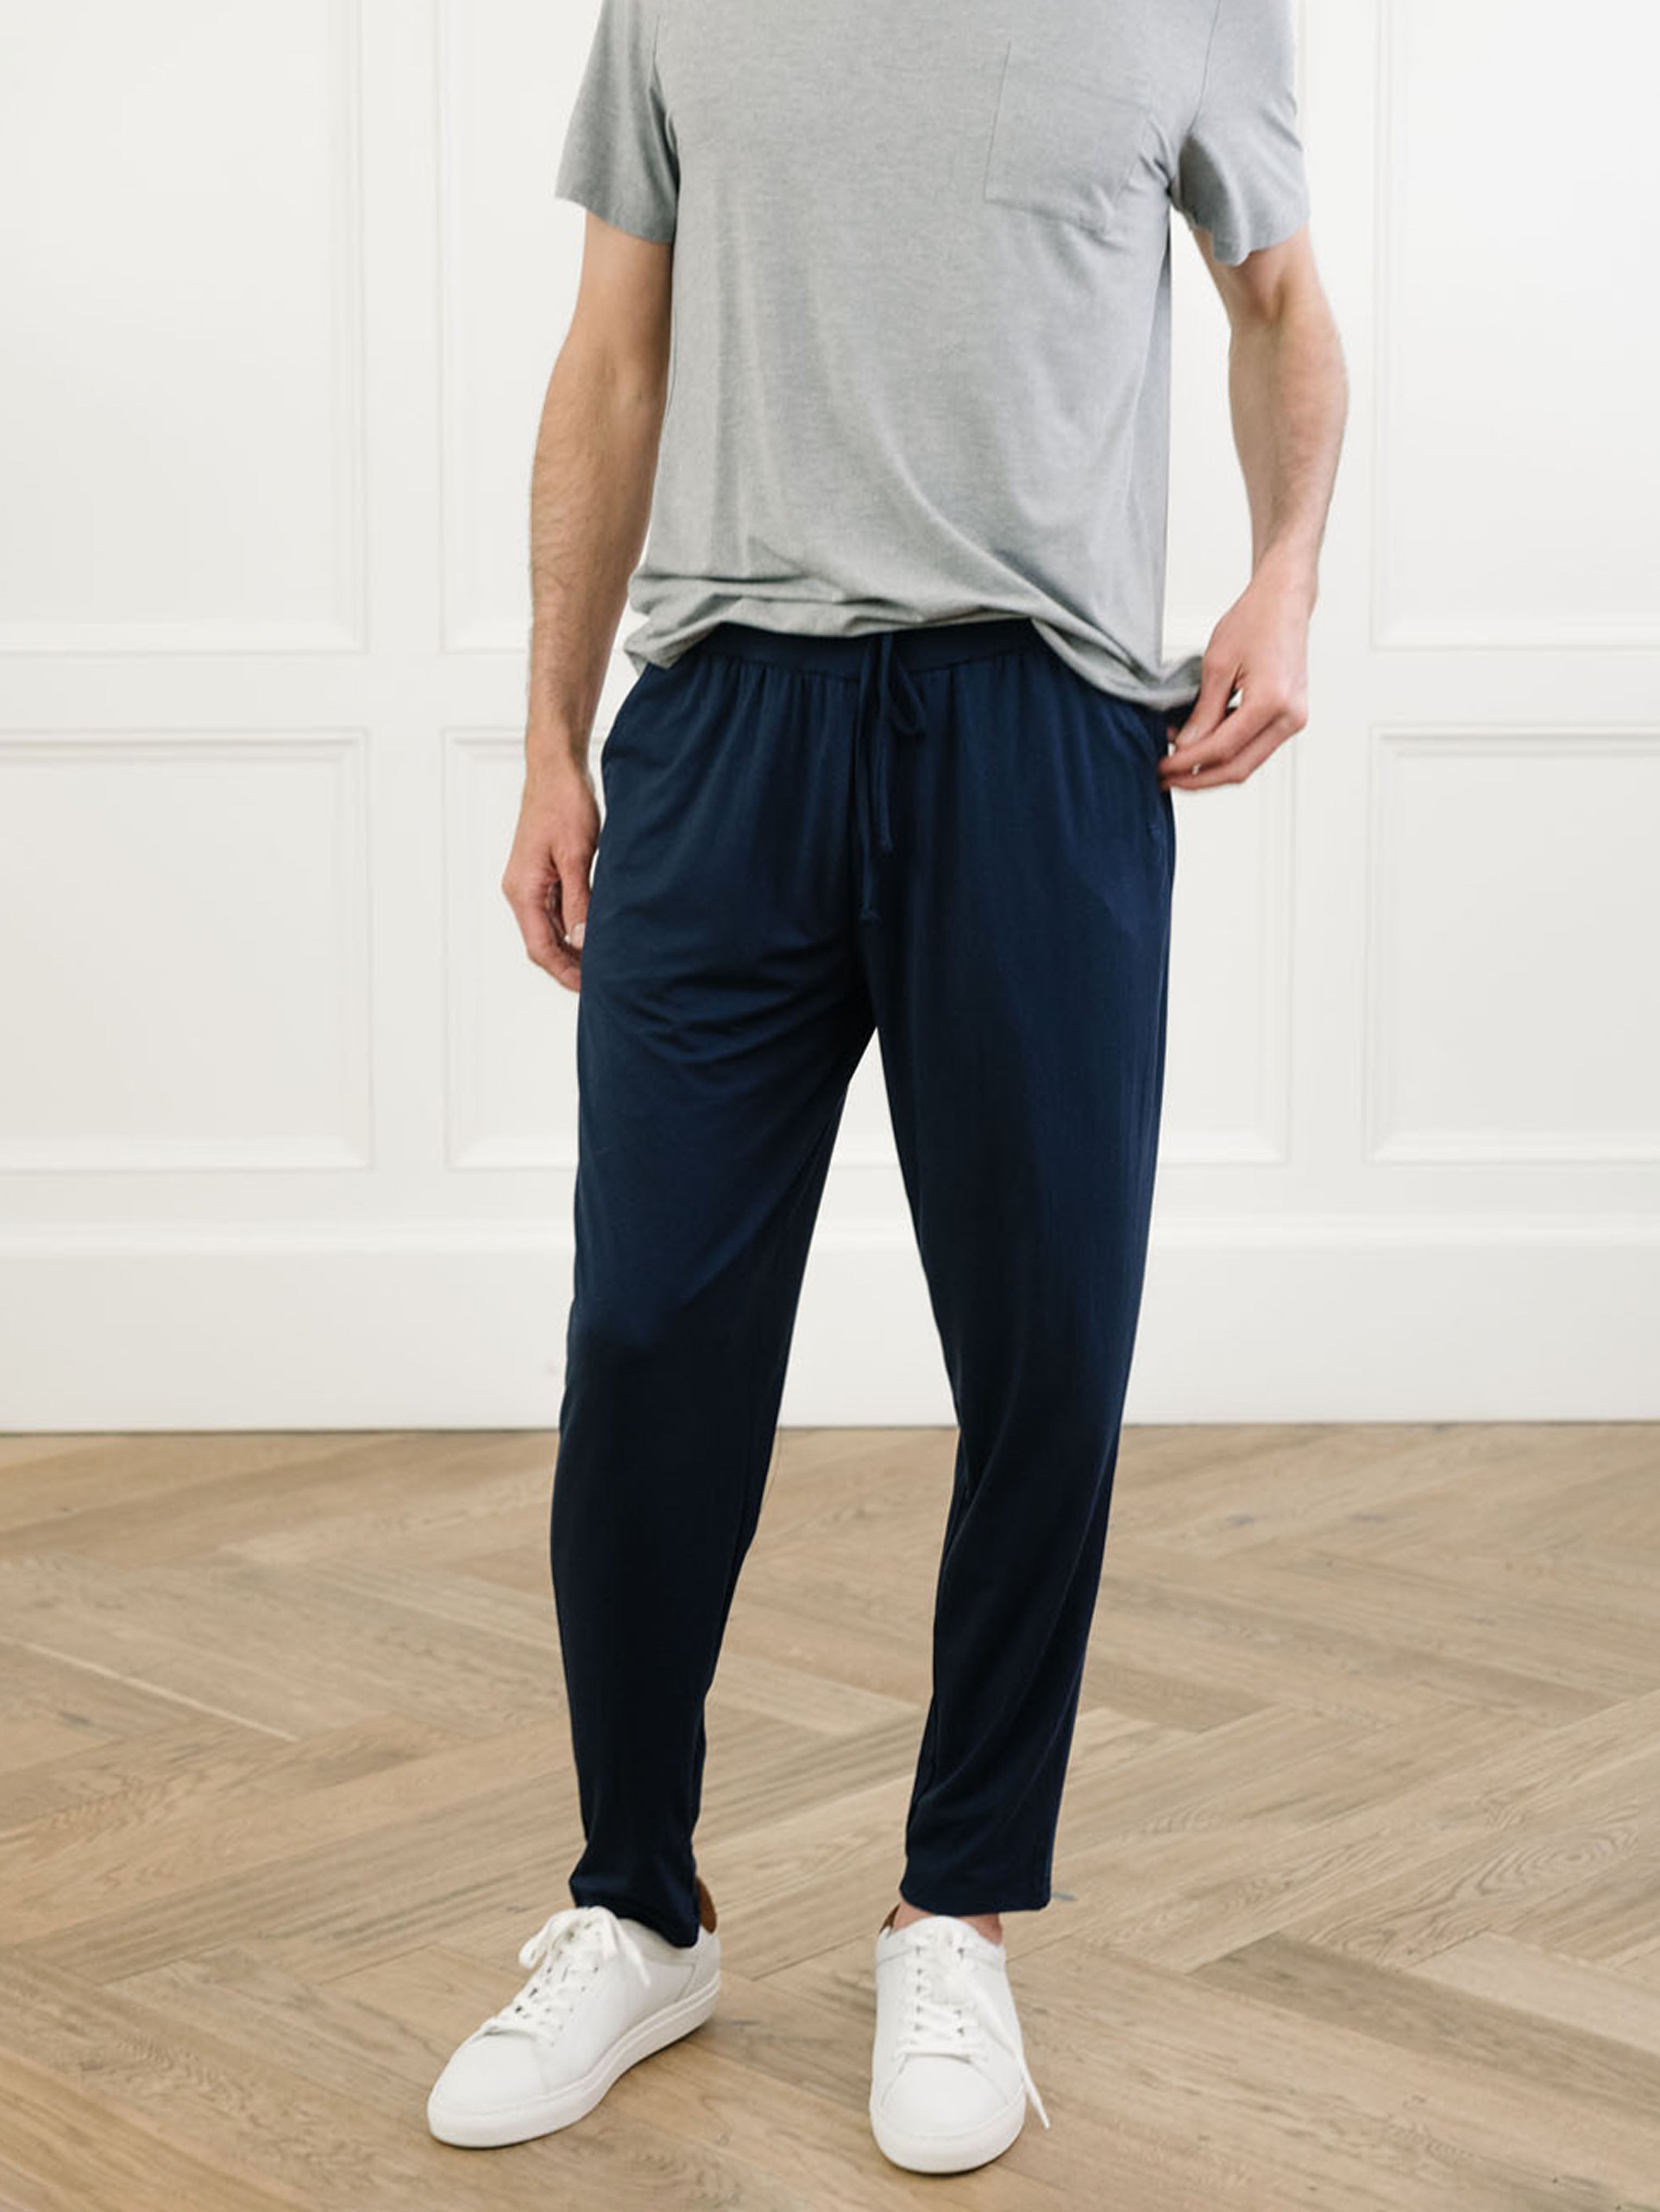 Mens Lounge Pants - JAM Clothing | Famous For Less